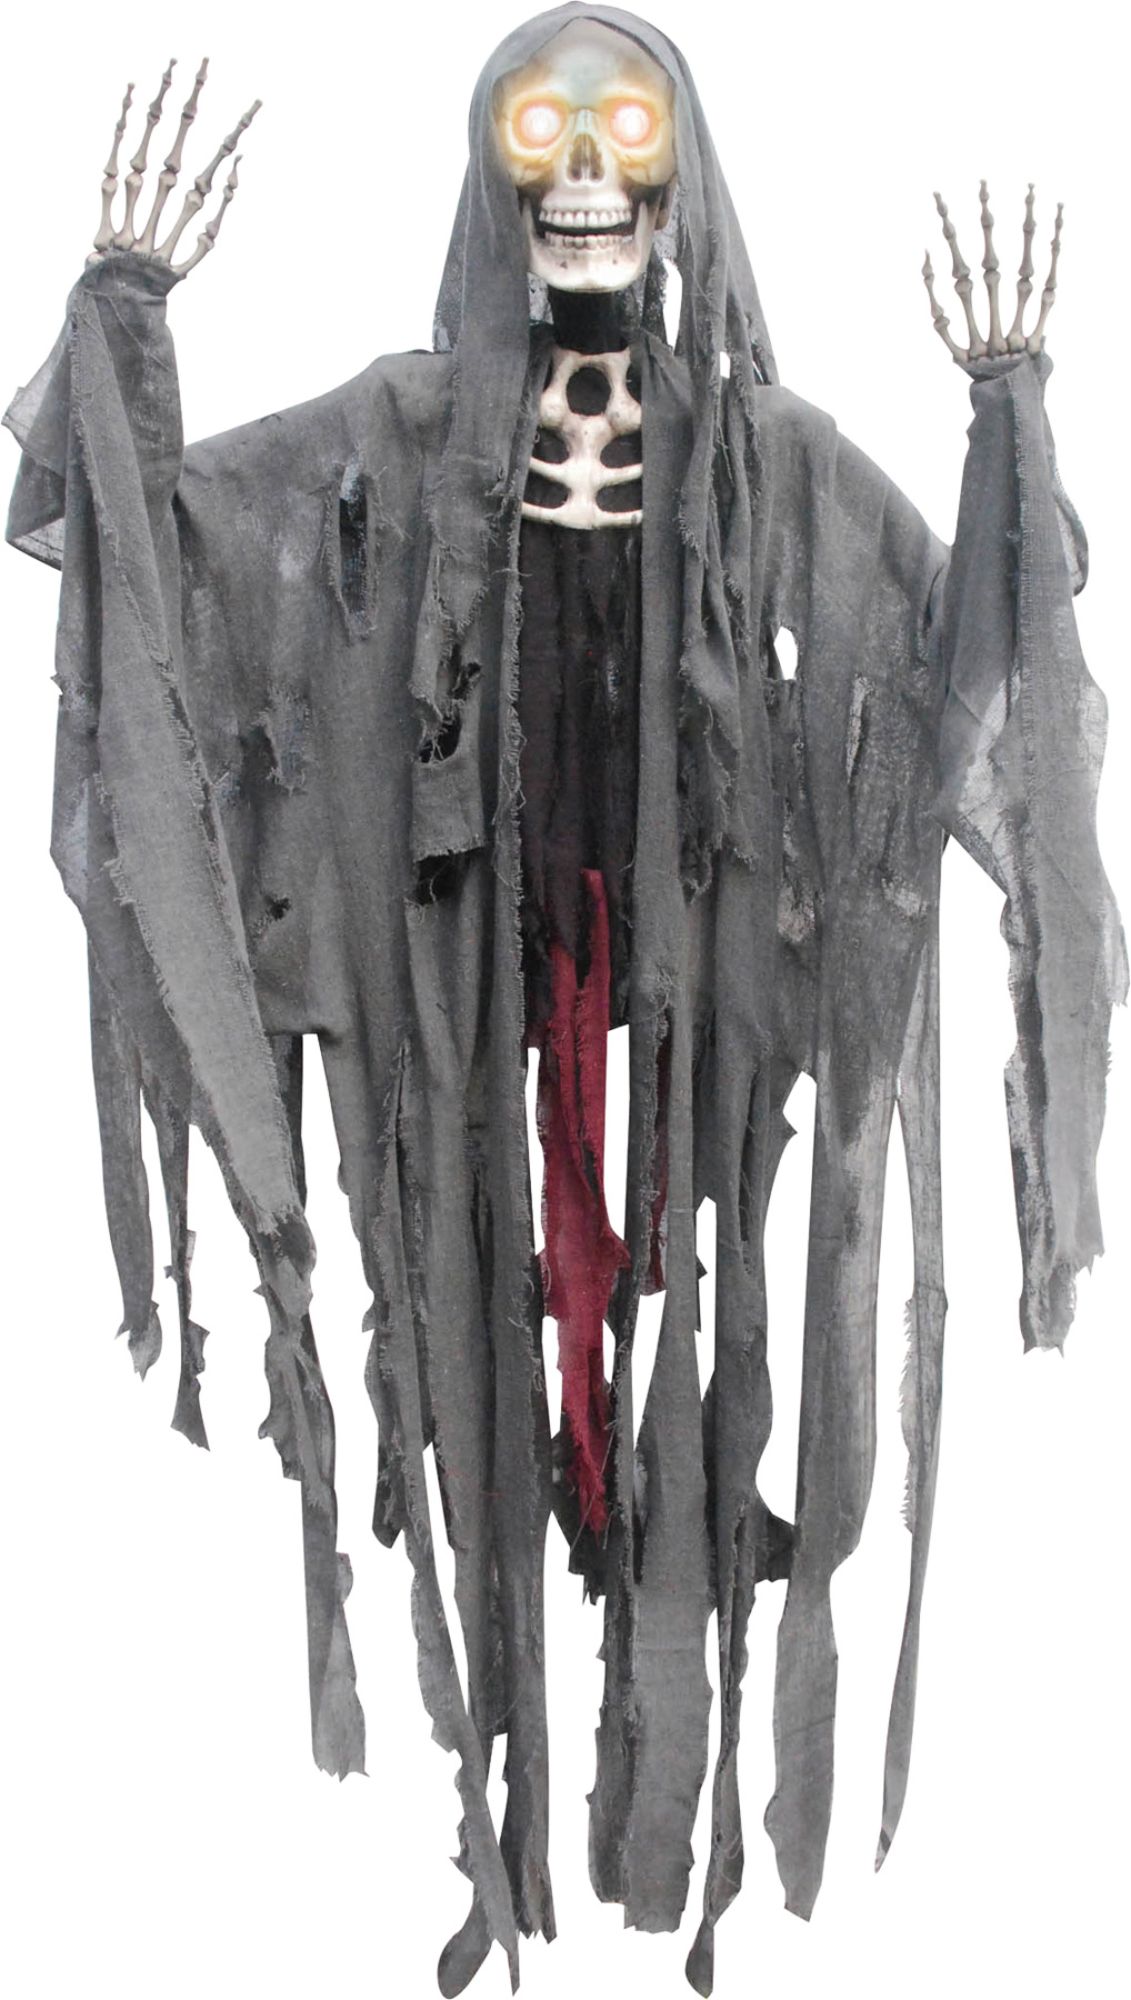 The Costume Center 60" Gray and Black Peeper Reaper With Moving Eyes Halloween Prop